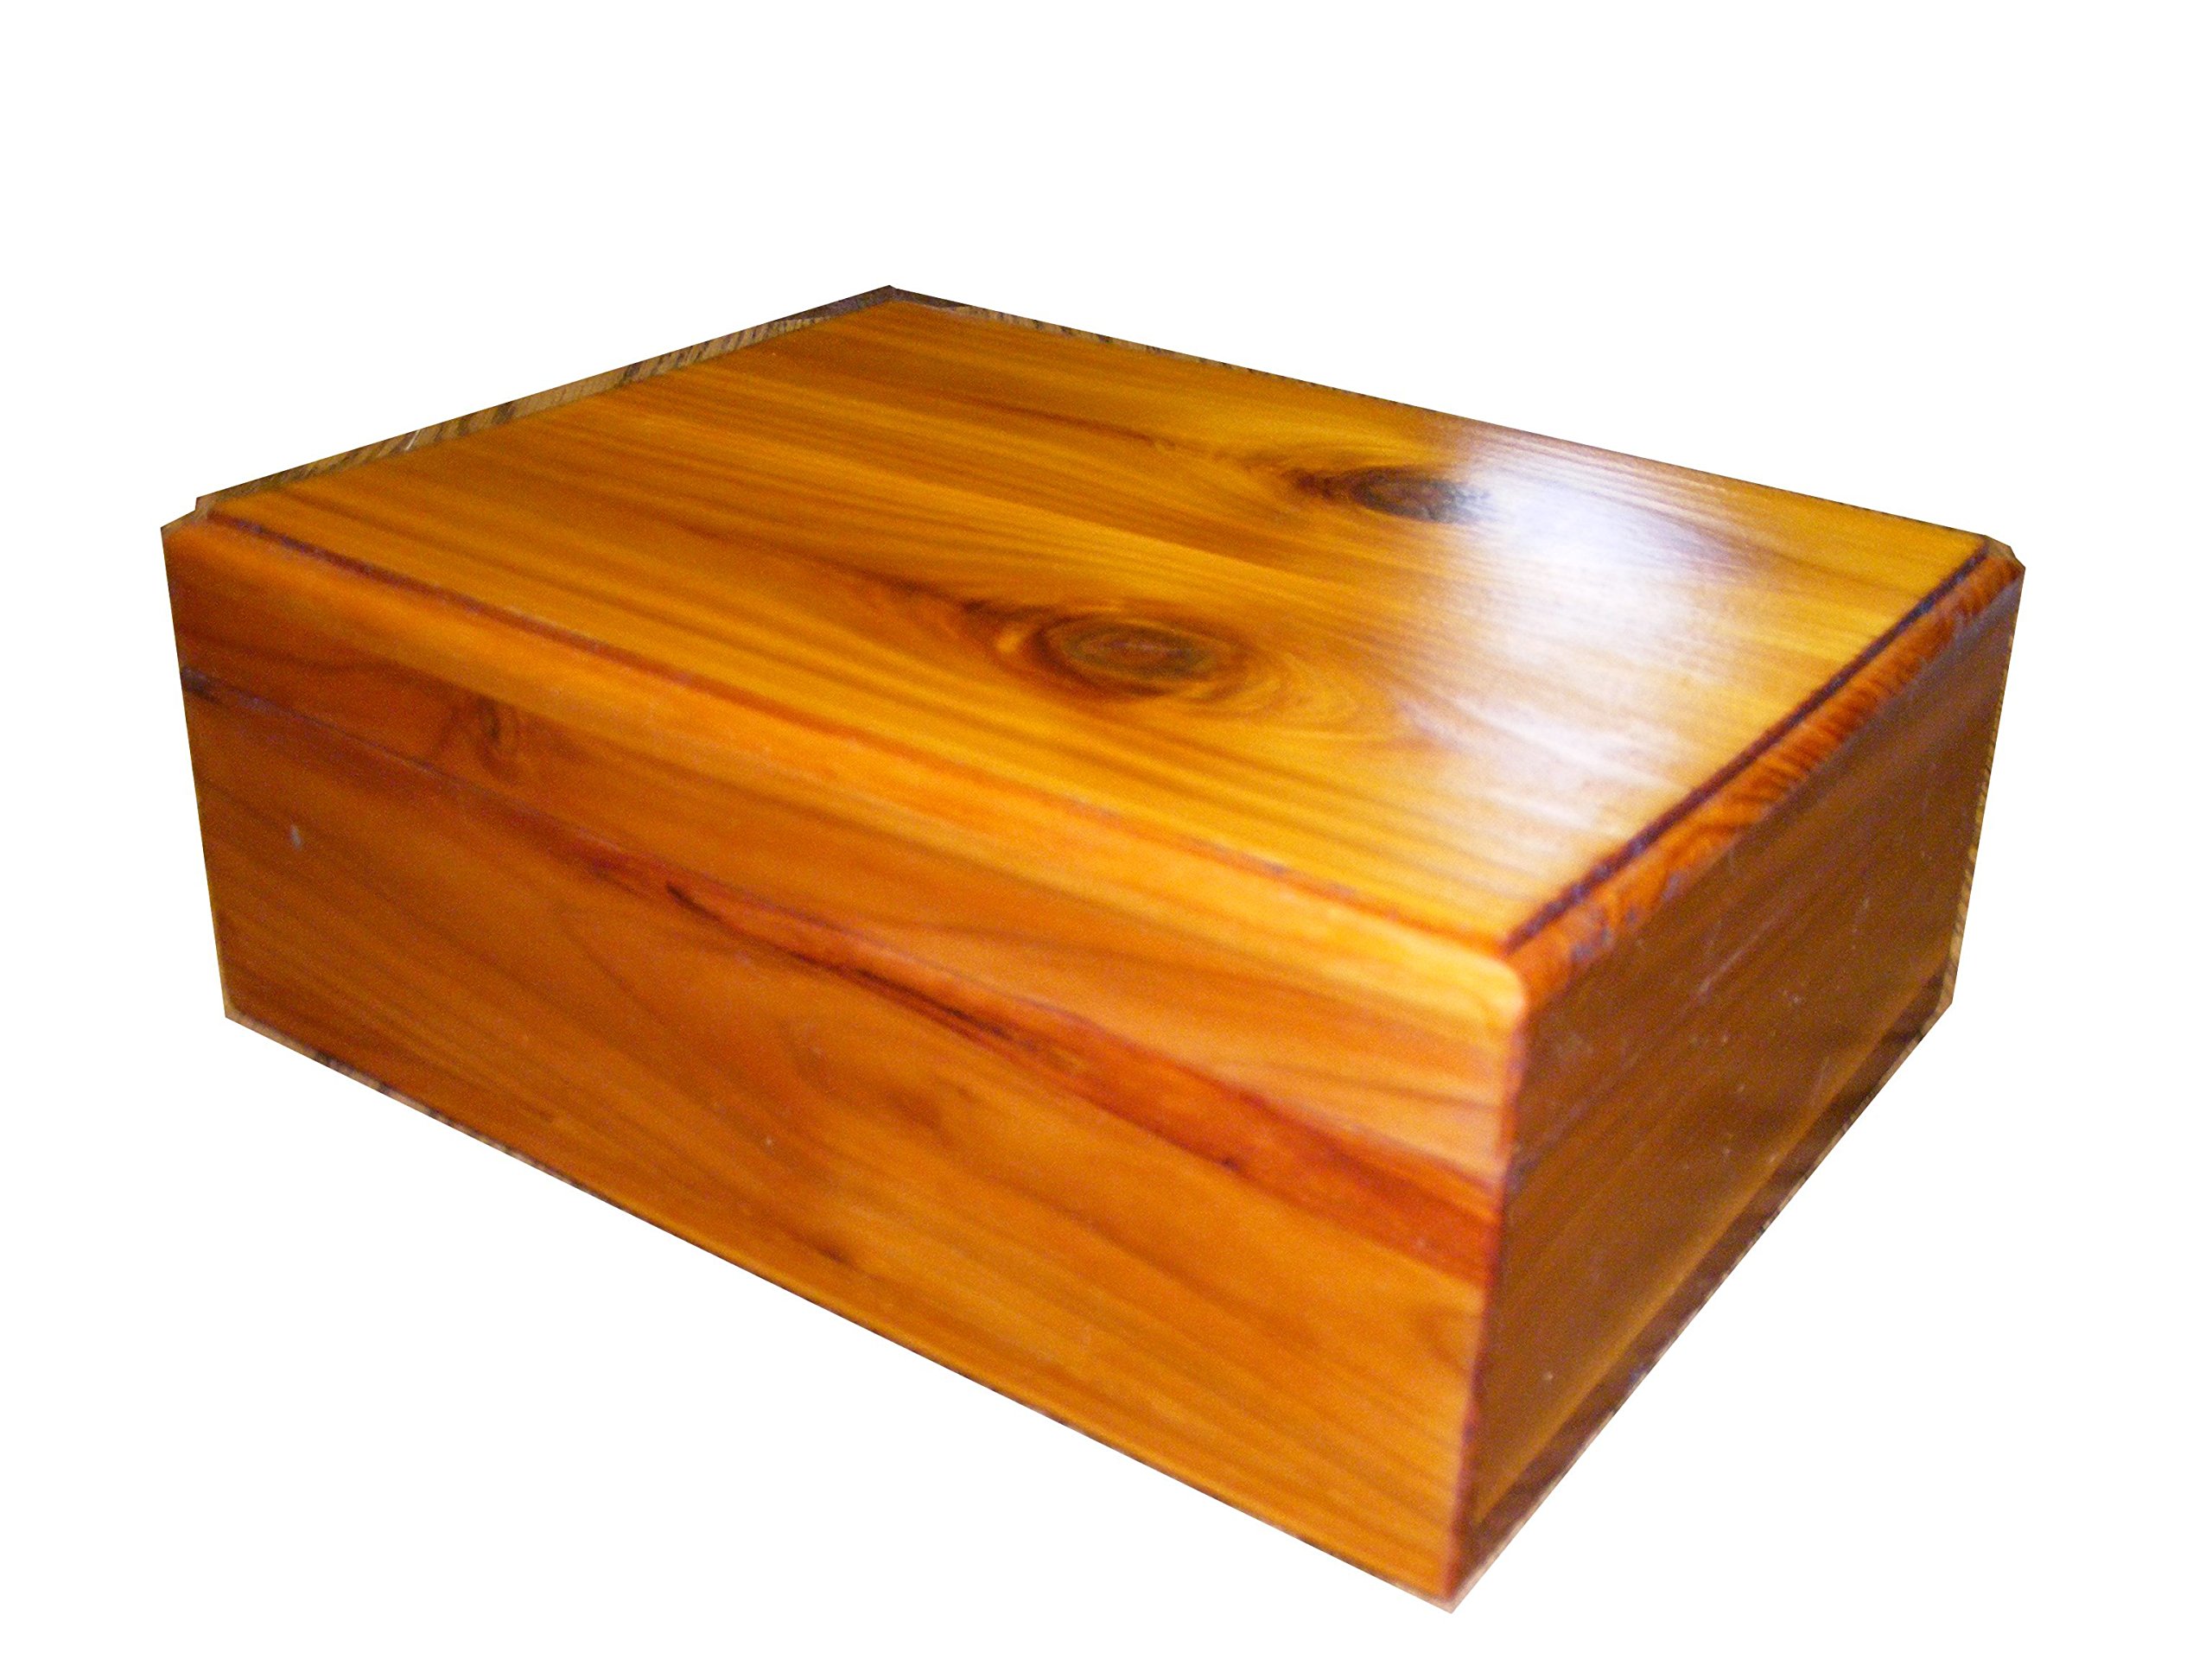 Cedar Keepsake Memory and Treasure Box or Storage Box - Size 10.75 x 8.5 x 4 Inches with French Rubbed Finish